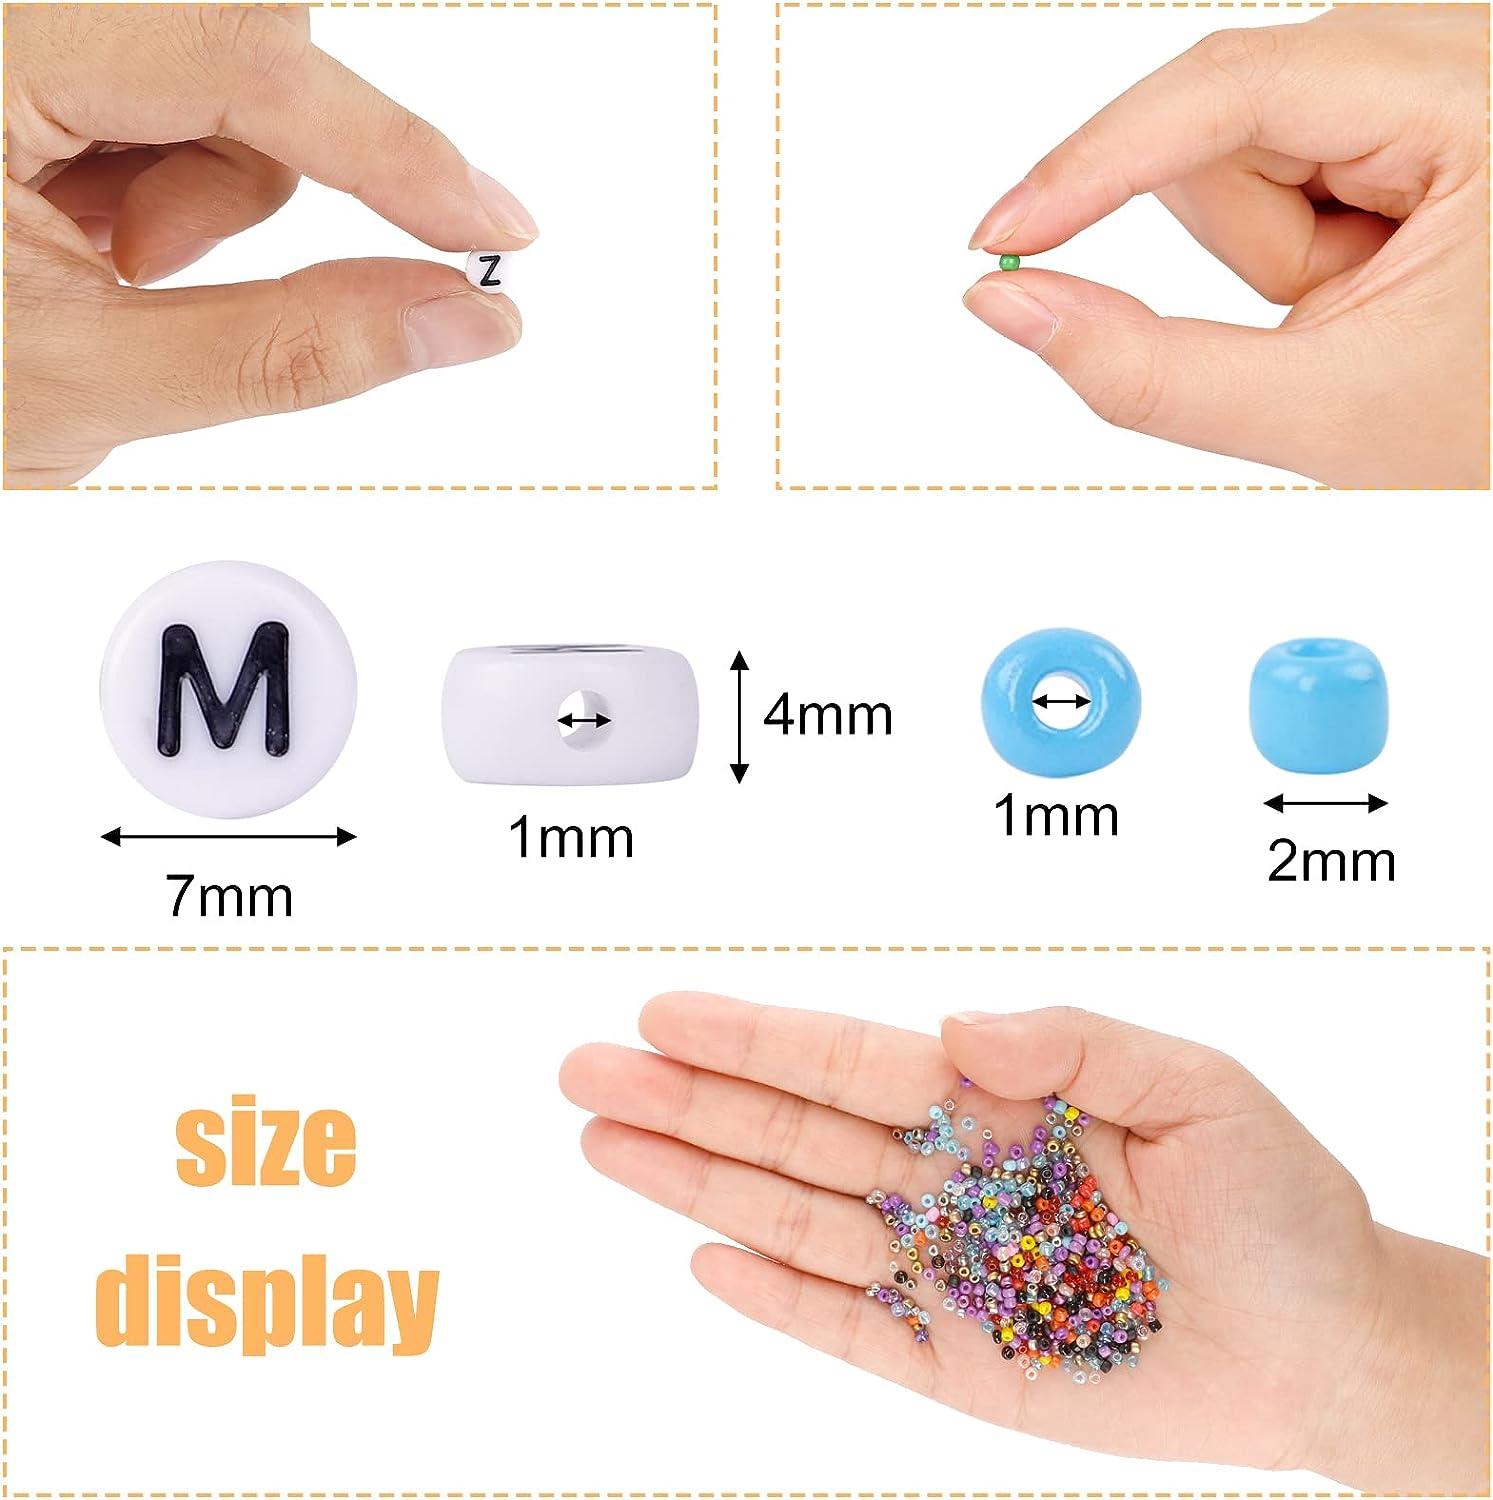 Quefe 38260pcs 2mm 12/0 Glass Seed Beads Kit for Jewelry Making, 48 Colors  Bracelets Beads Bulk with 260pcs Alphabet Beads